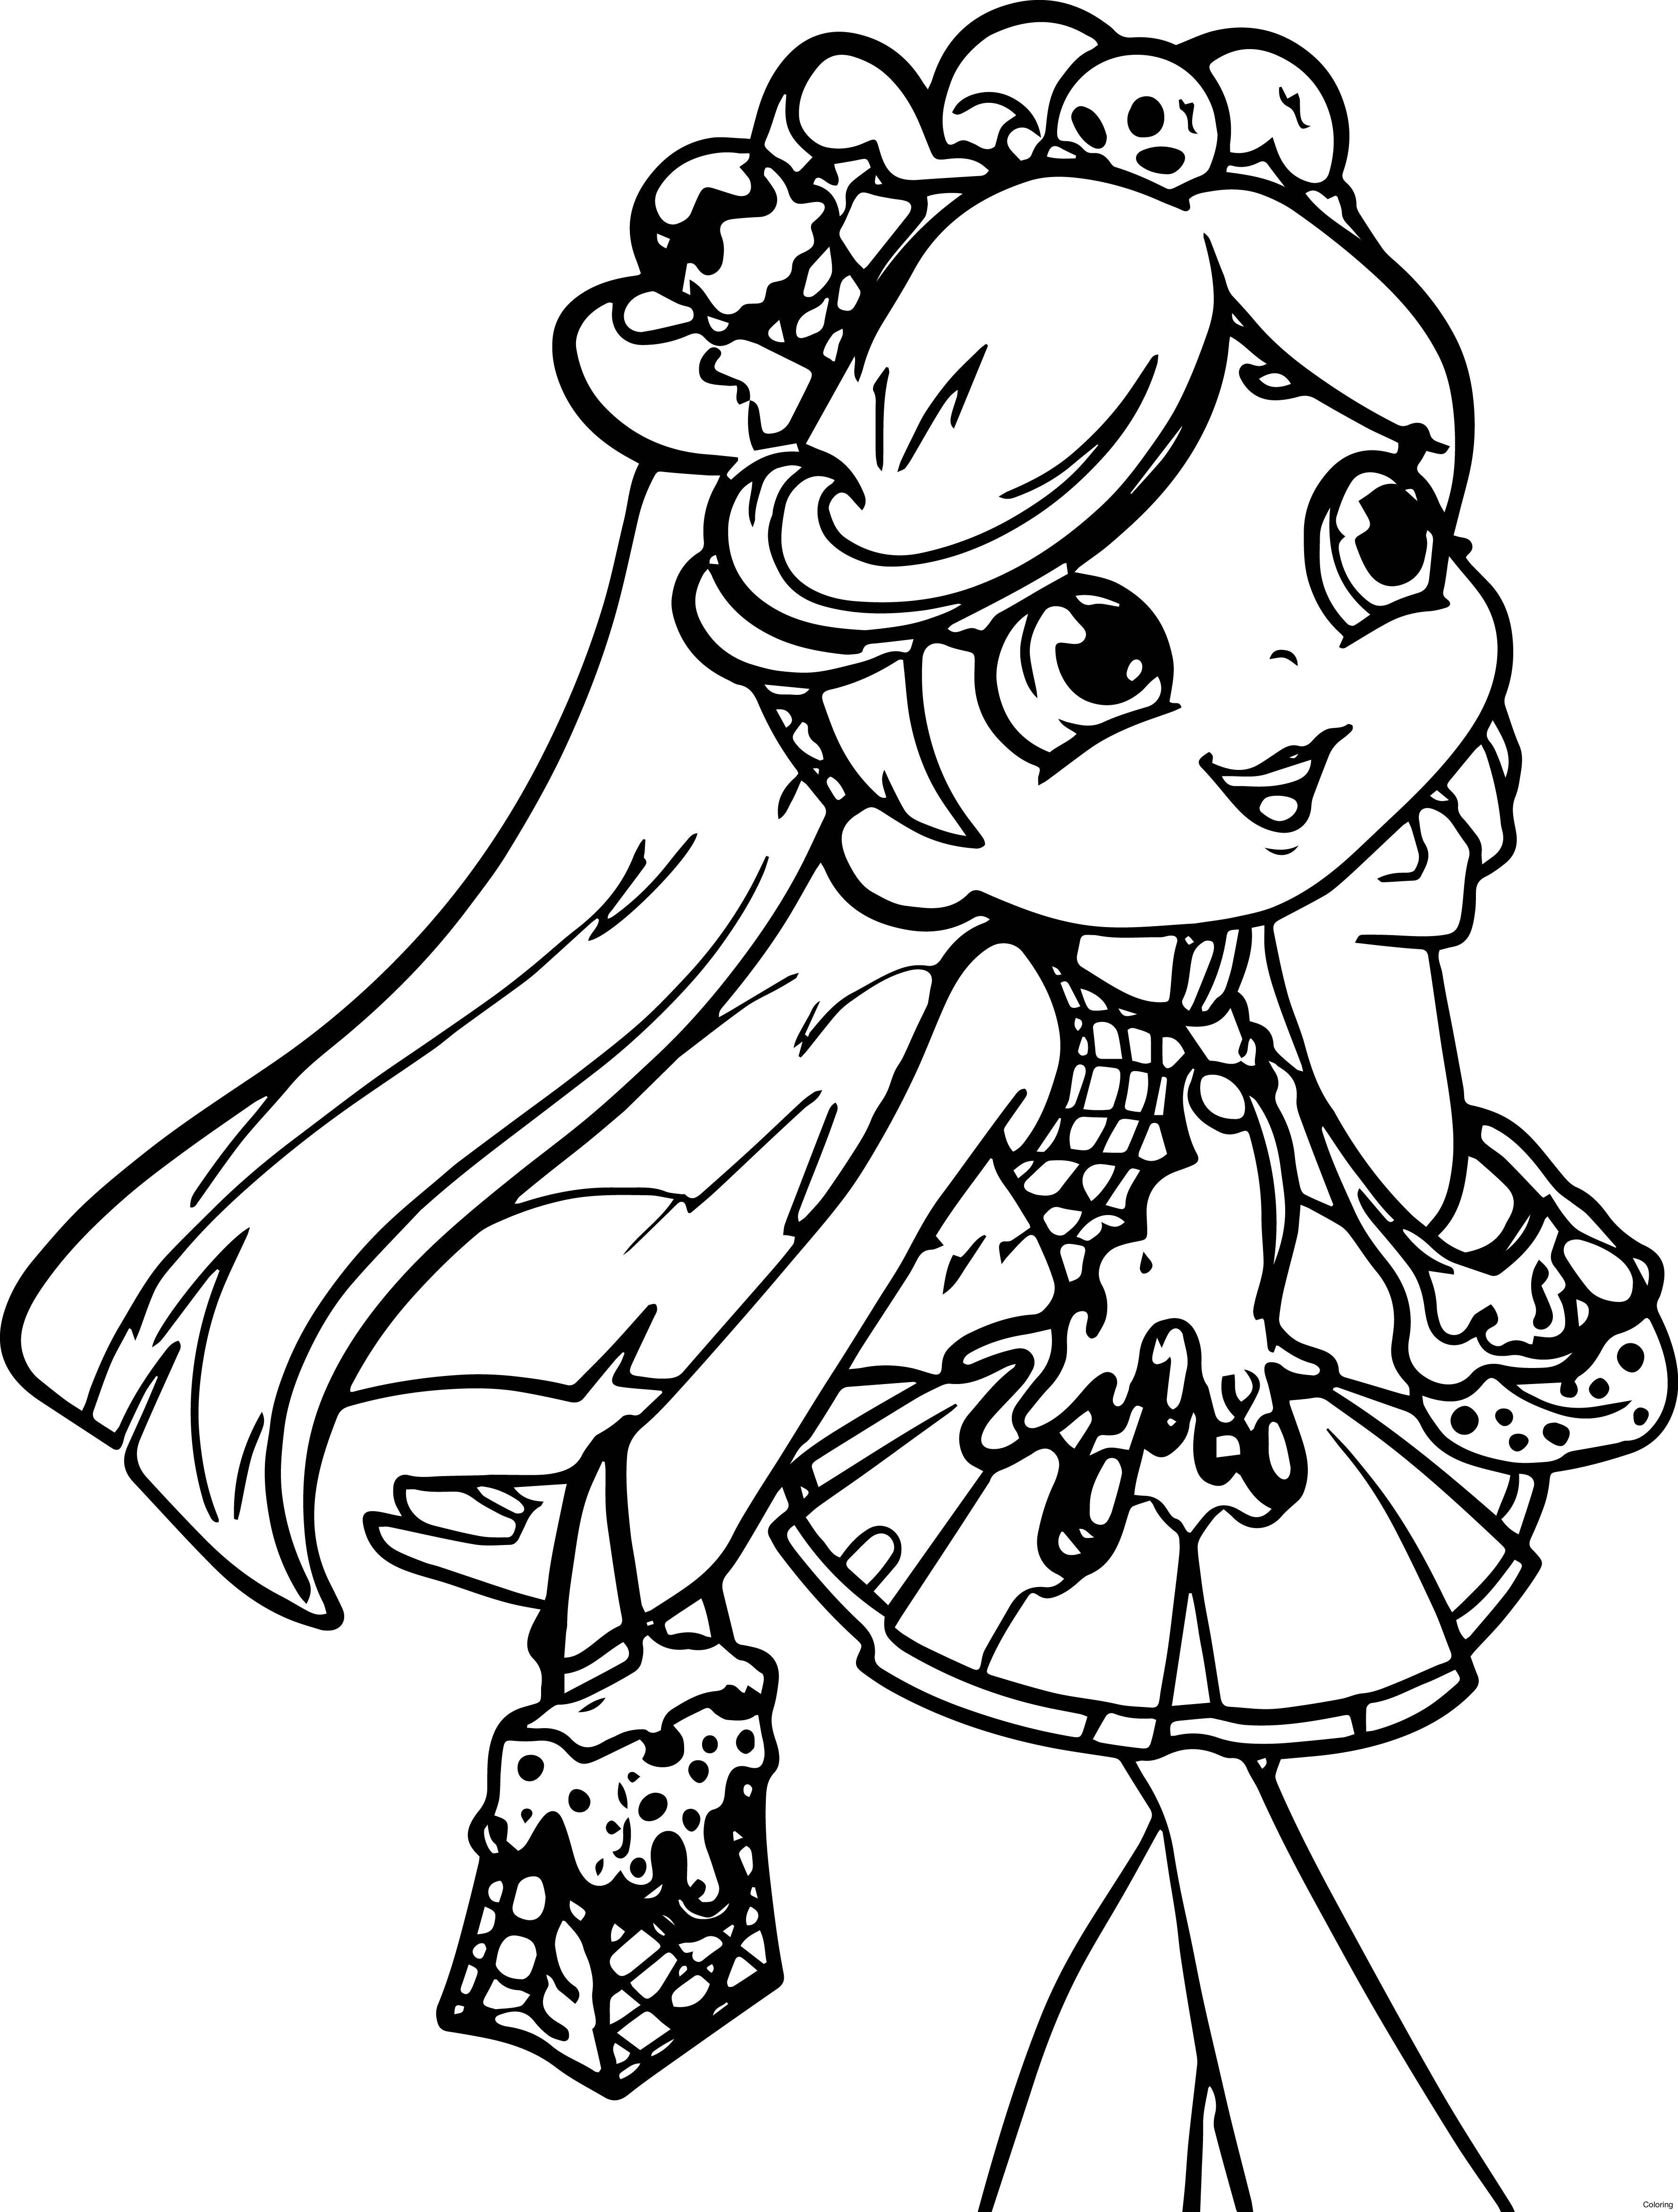 Coloring Pages For Girls Shopkins
 Shopkins Drawing Pages at GetDrawings